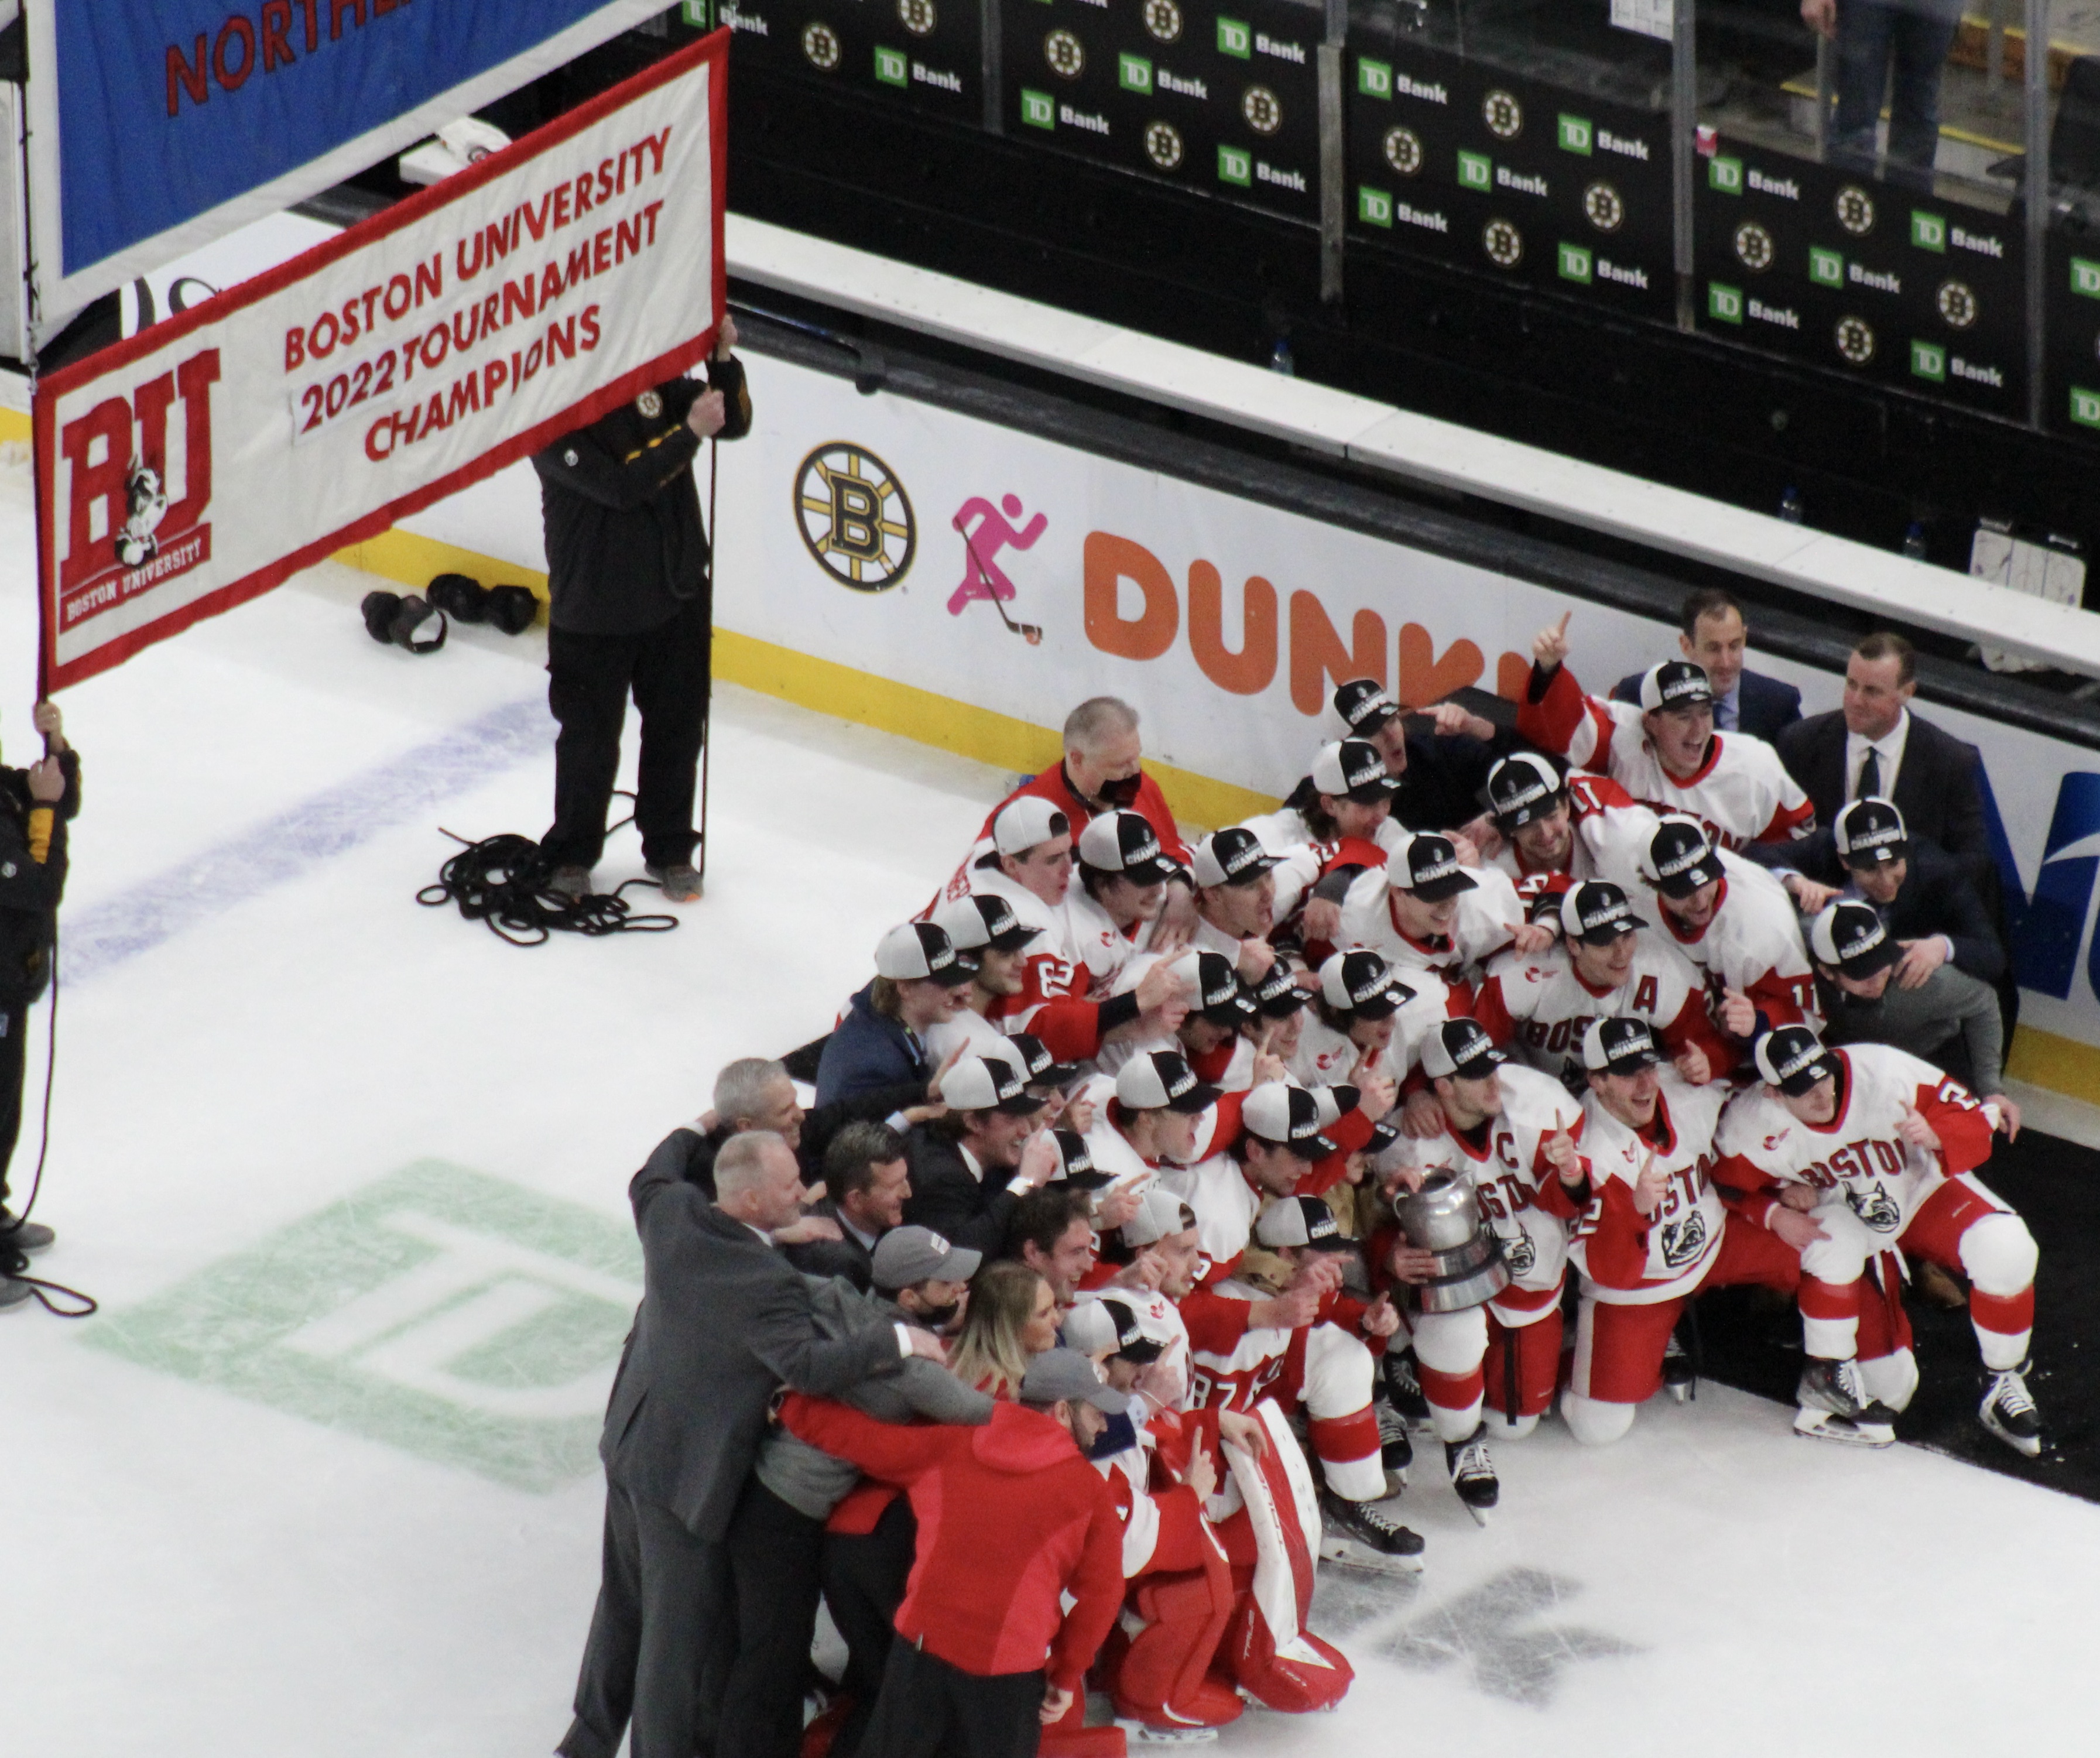 Terriers “All Rad” in Dramatic Beanpot Final